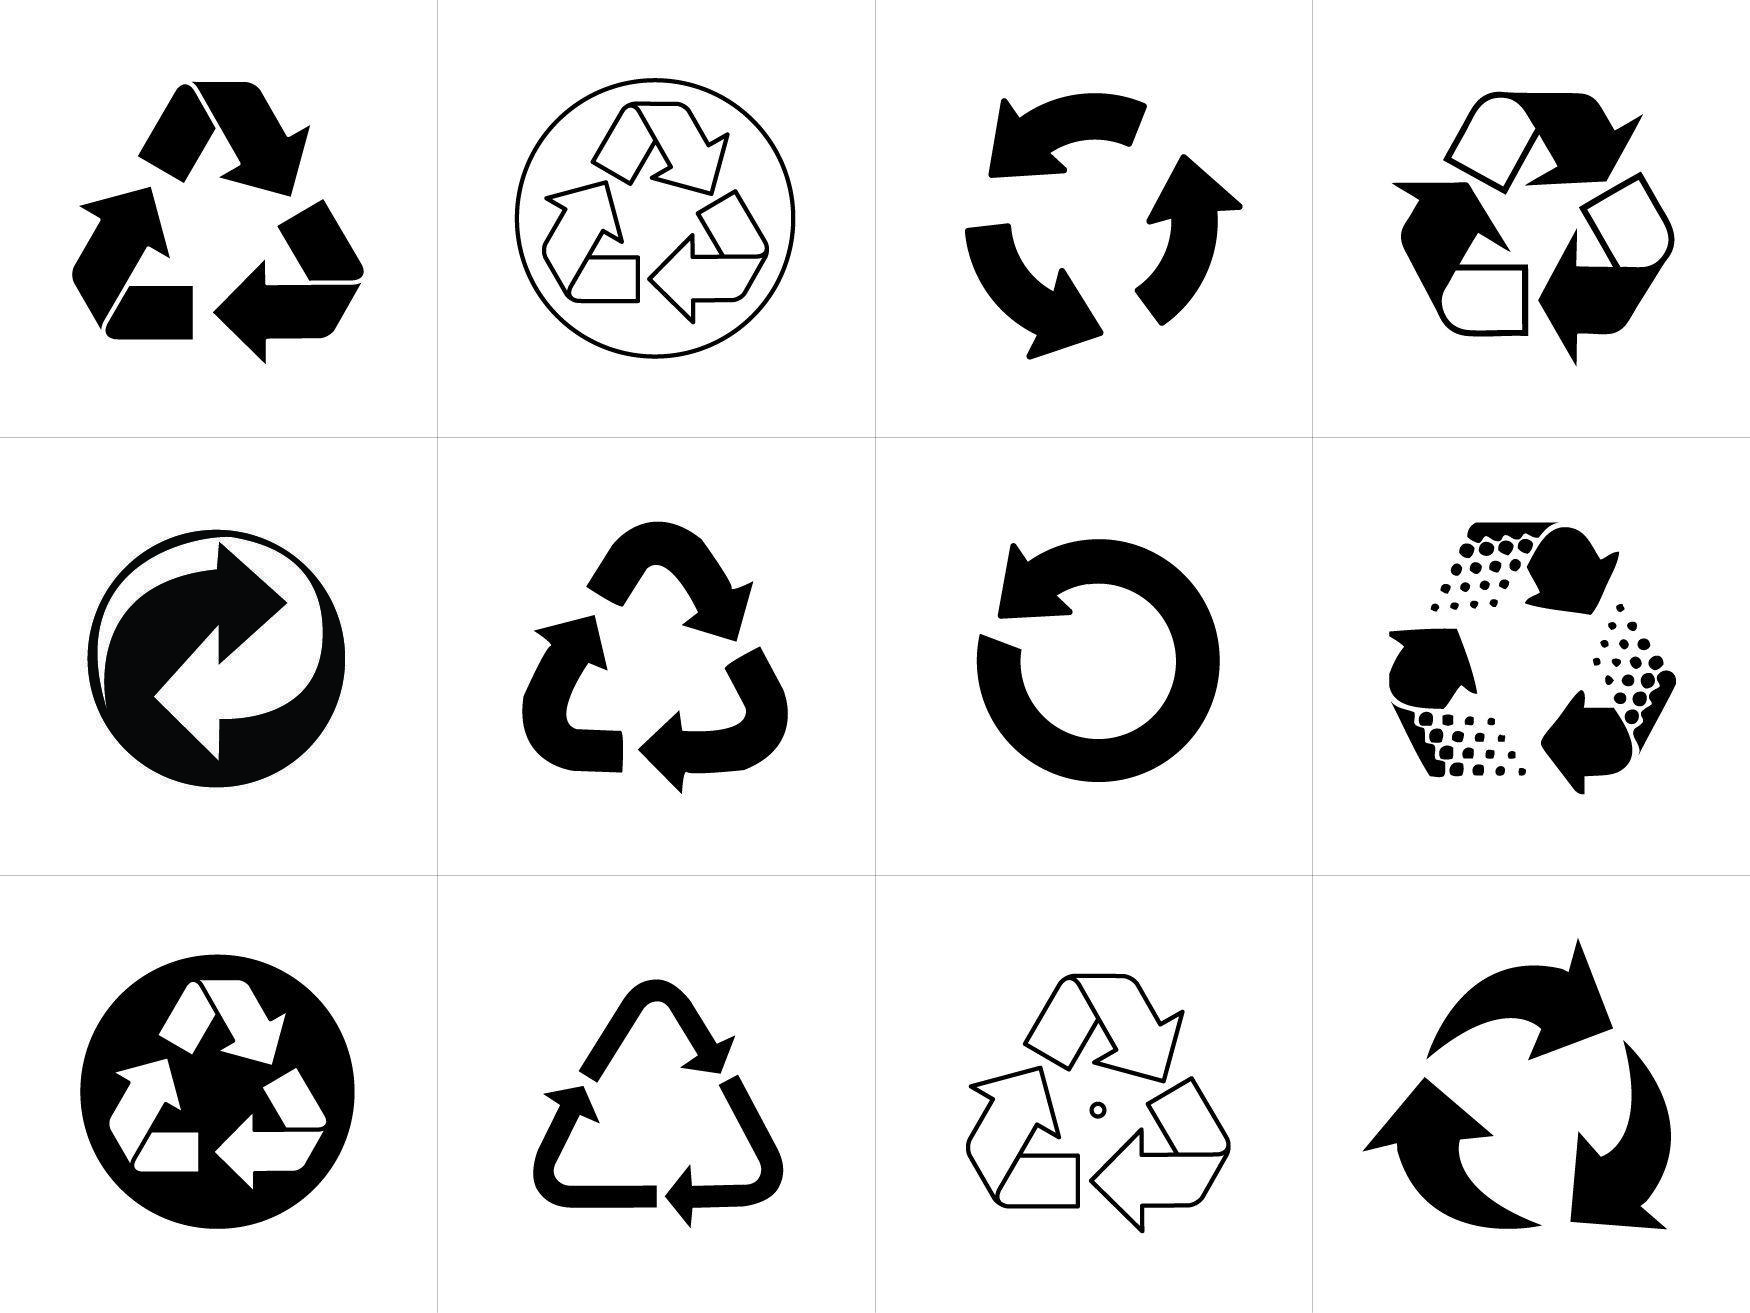 Black and White Recycle Logo - Recycling Symbol Vectors for Download. NEFF. Recycle